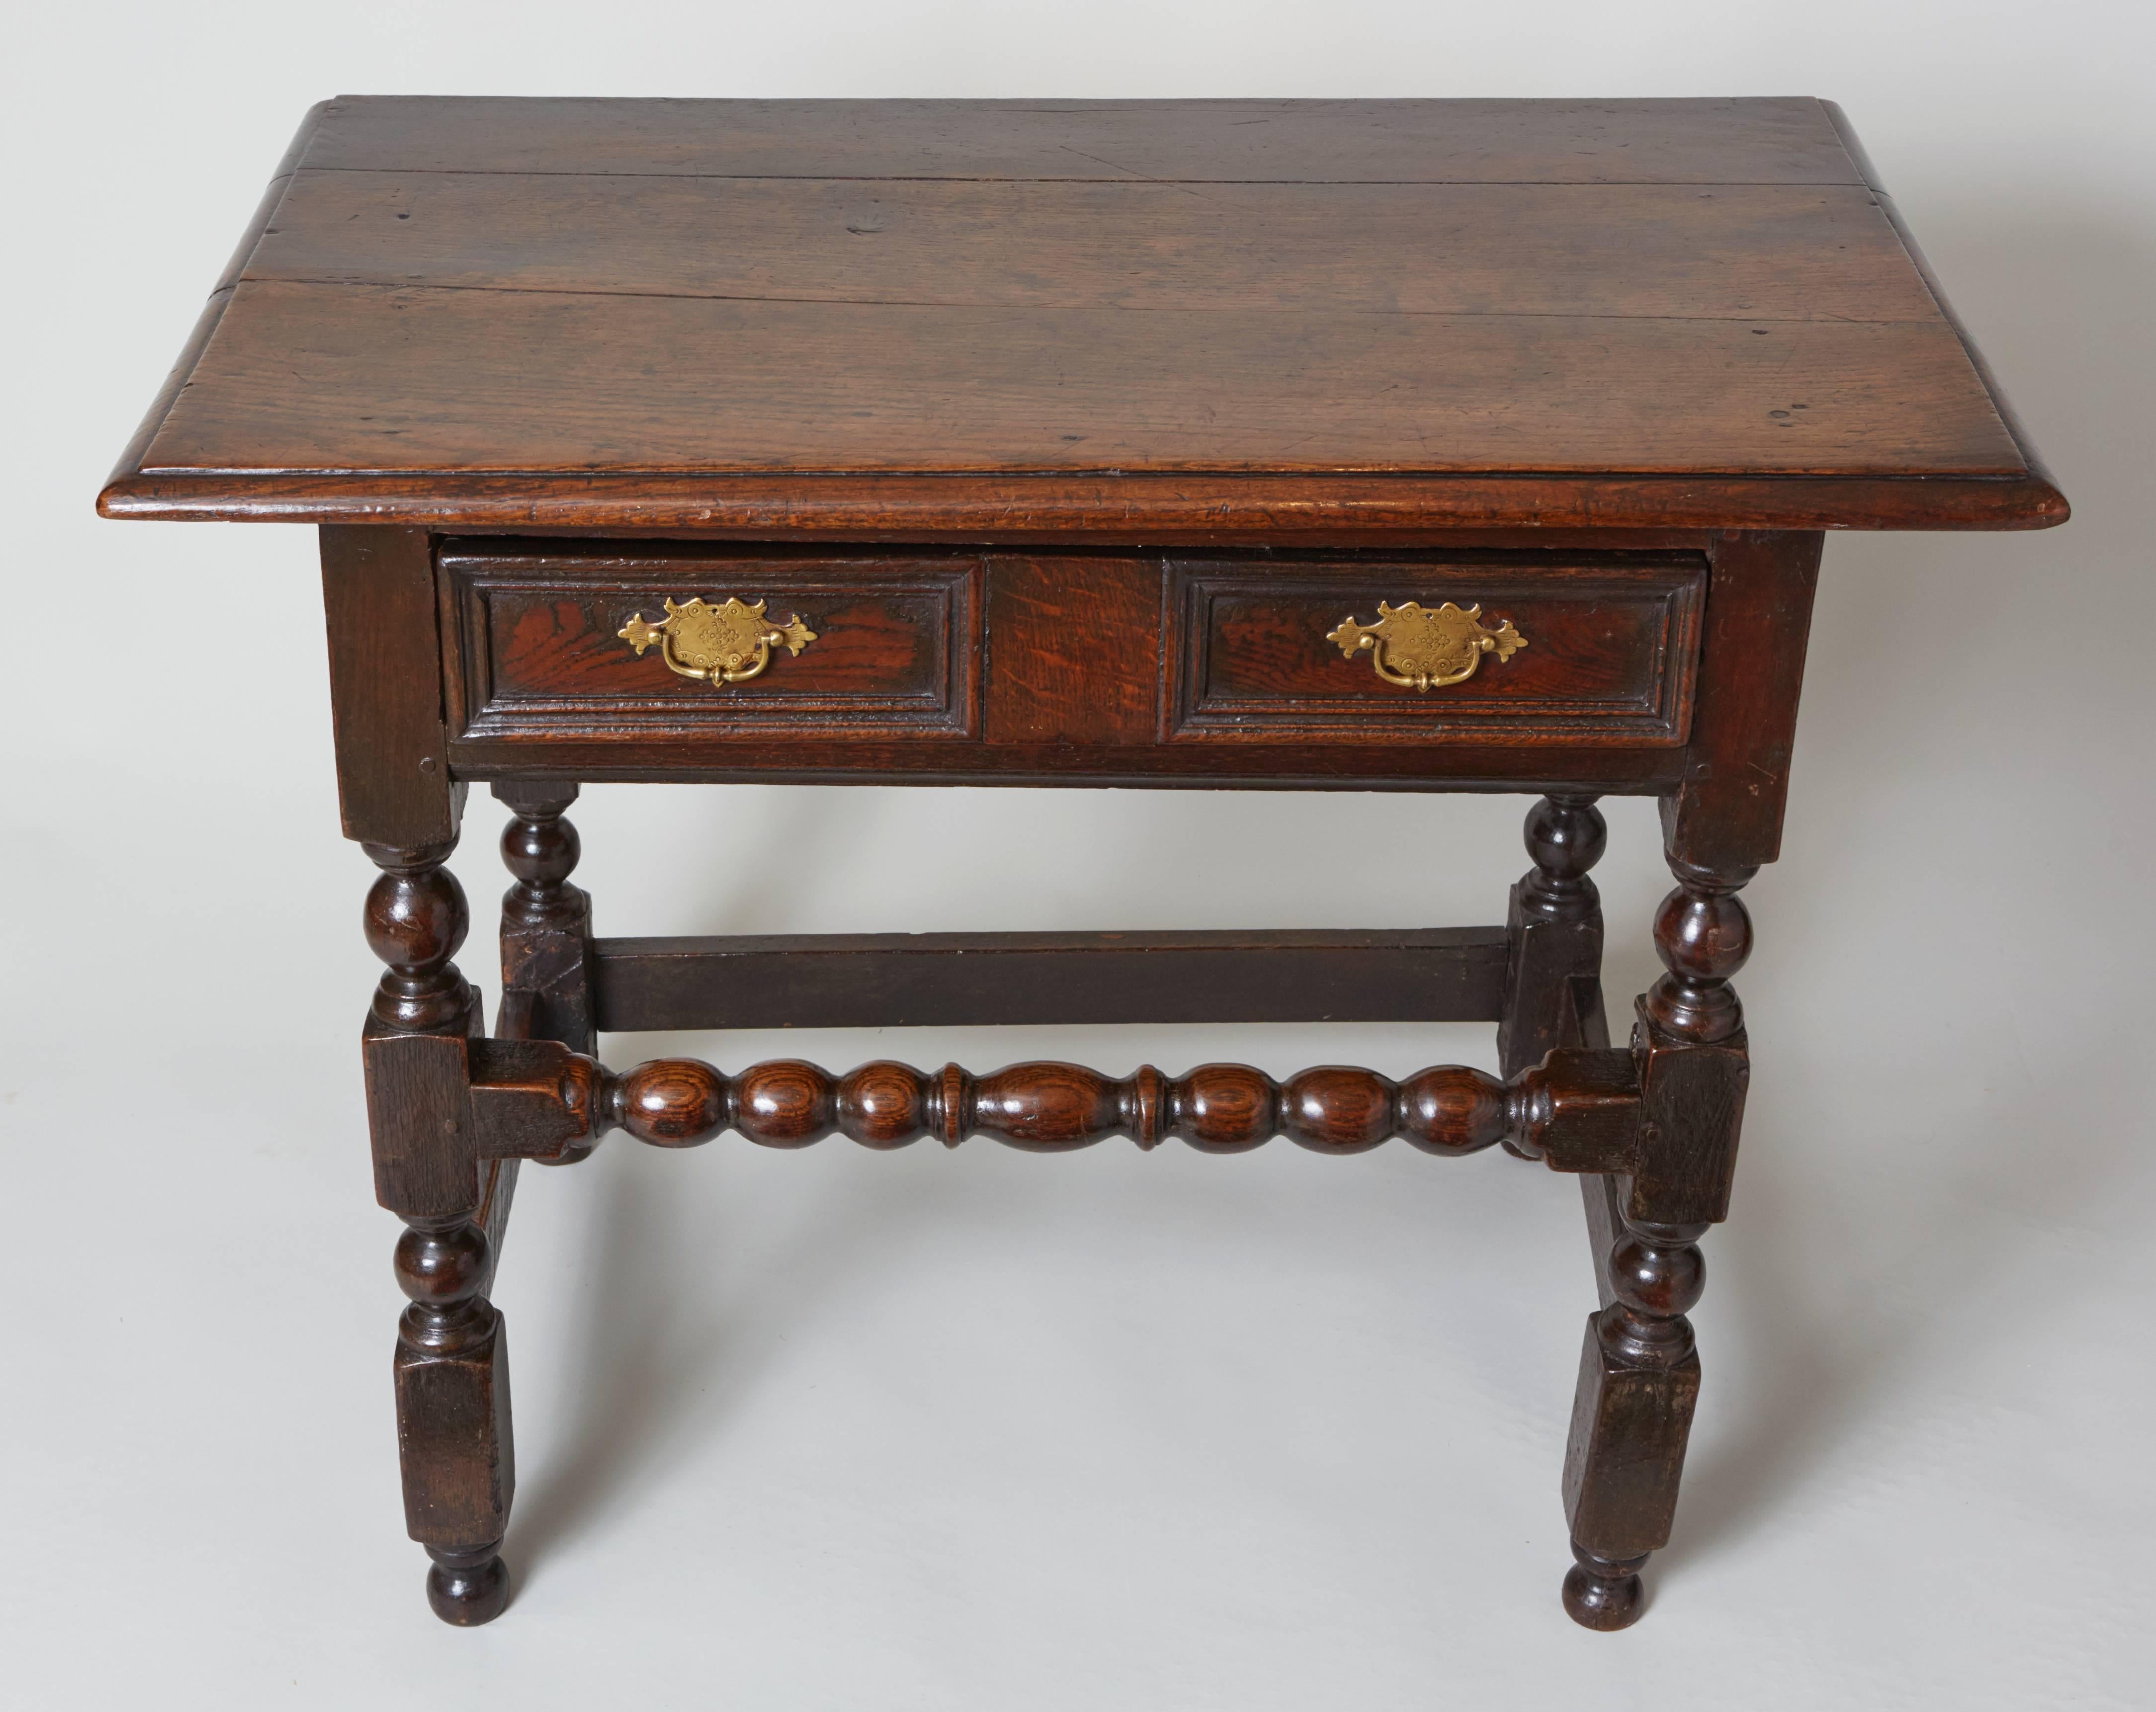 Lovely Charles II period English oak side table. The richly patinated oak top with heavy thumb molded edge over single drawer with double molded panels standing on block and ball turned legs the front with desirable bobbin and reel turned high